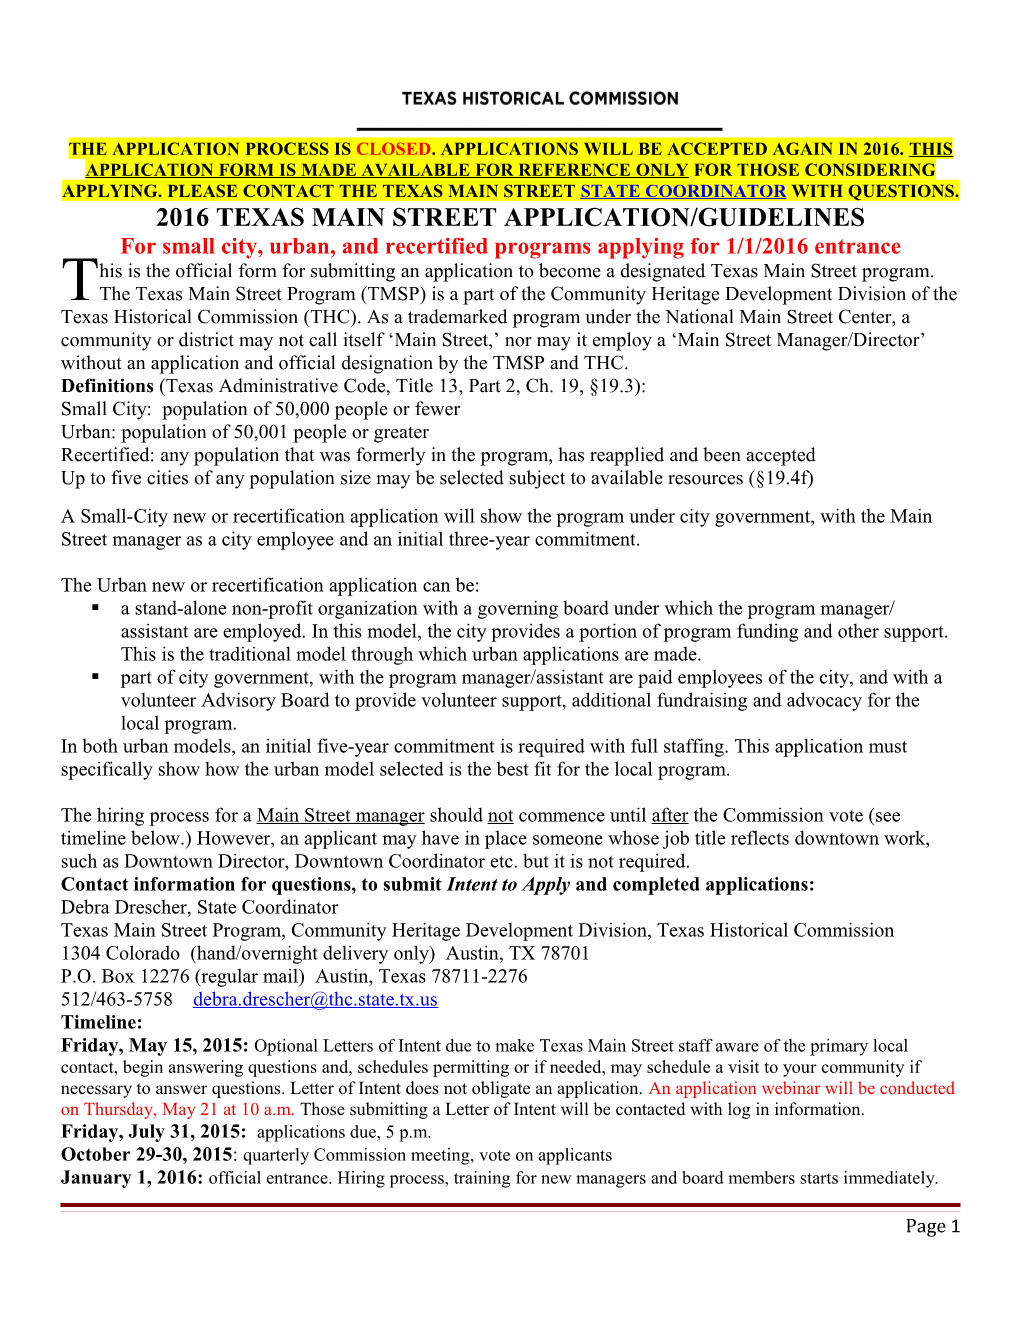 2016 Texas Main Street Application/Guidelines